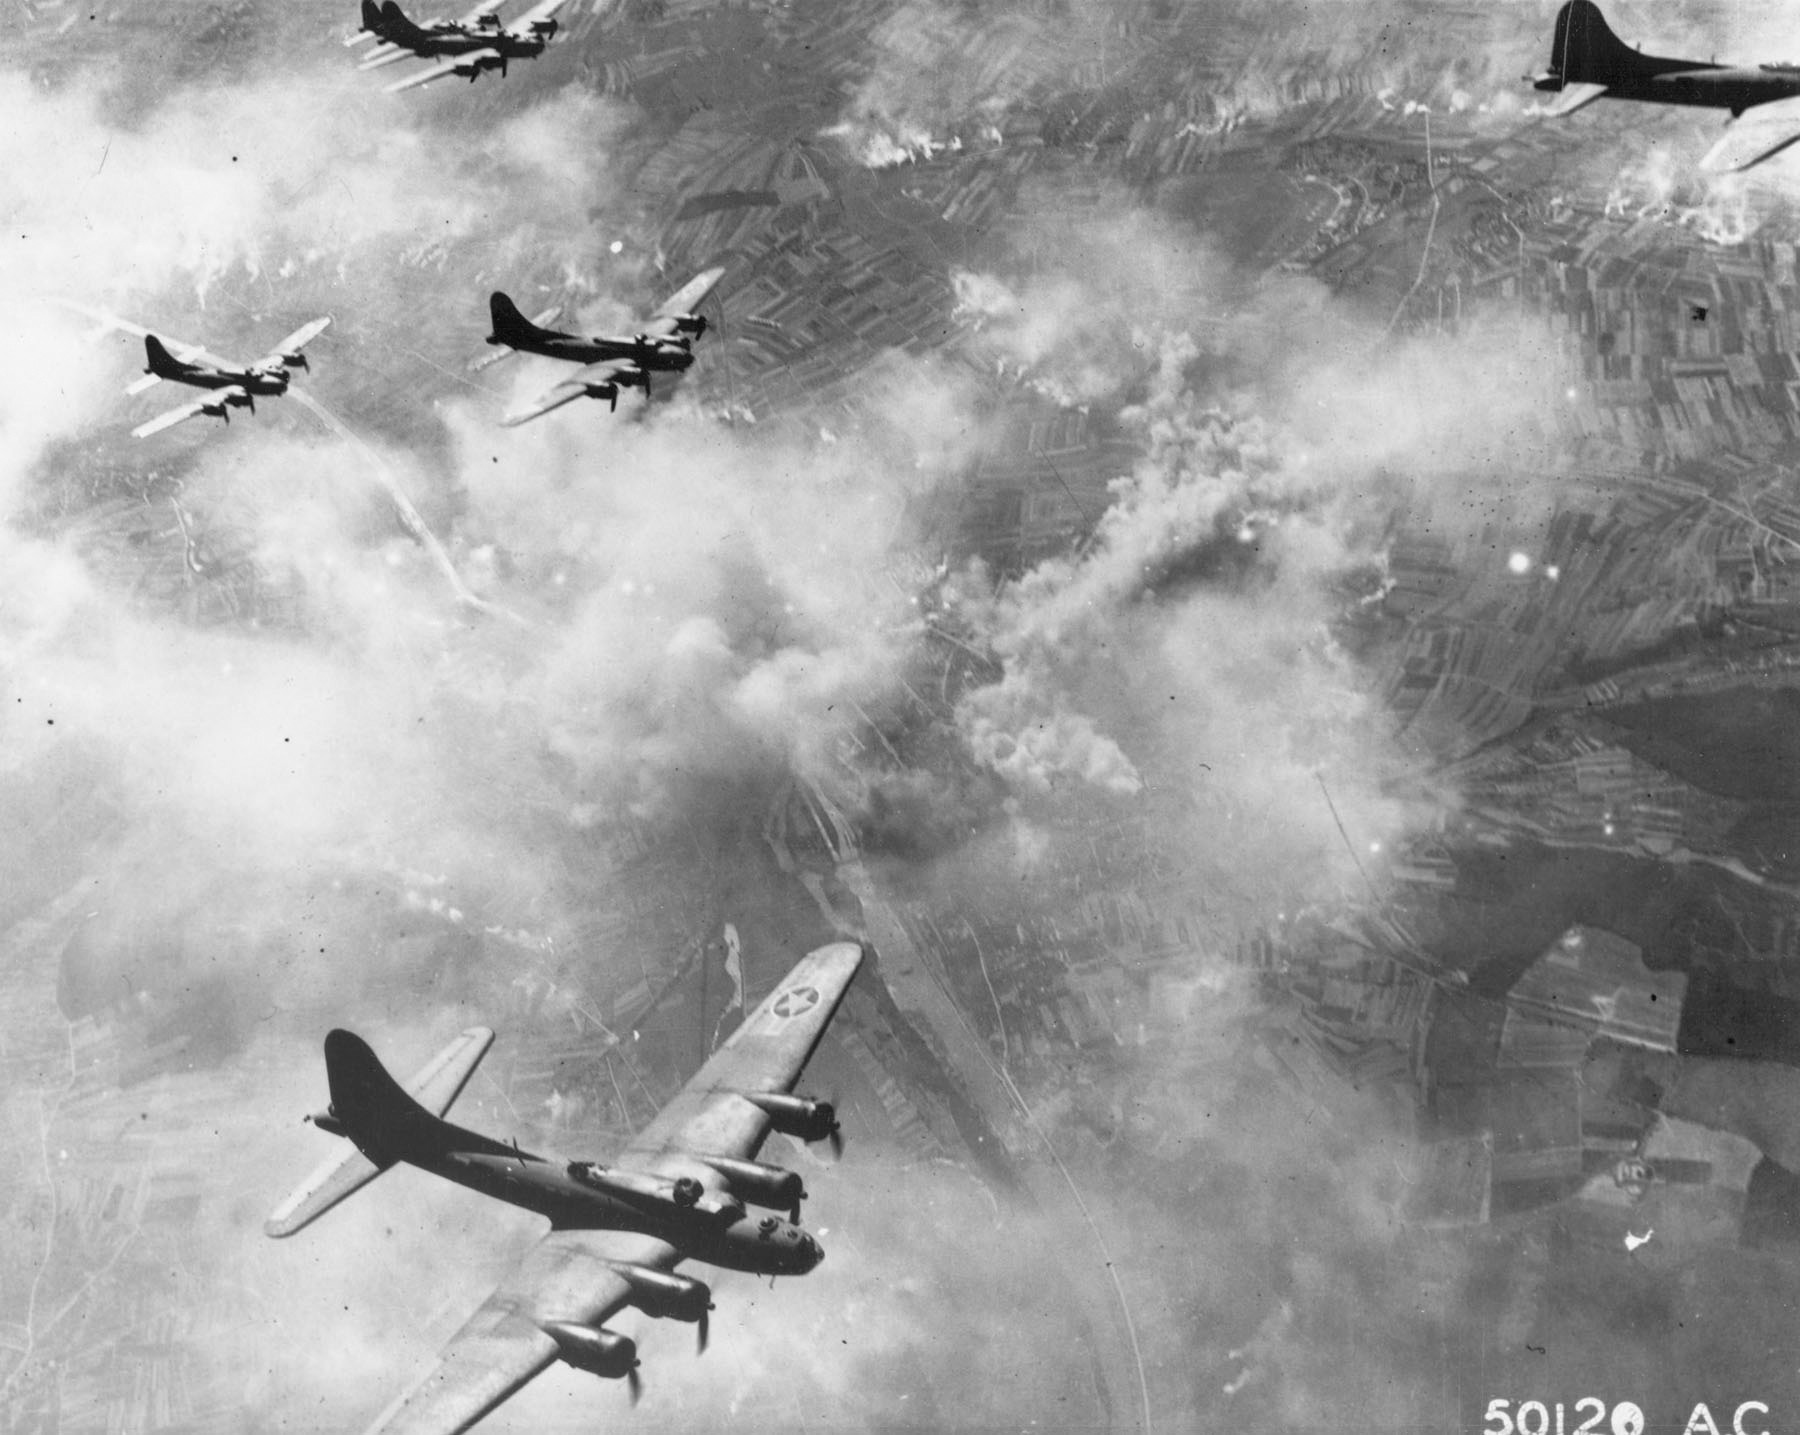 On August 17, 1943, several hundred B-17s participated in the double raid on Schweinfurt-Regensburg. The losses were staggering, with 60 B-17s downed or damaged beyond repair.